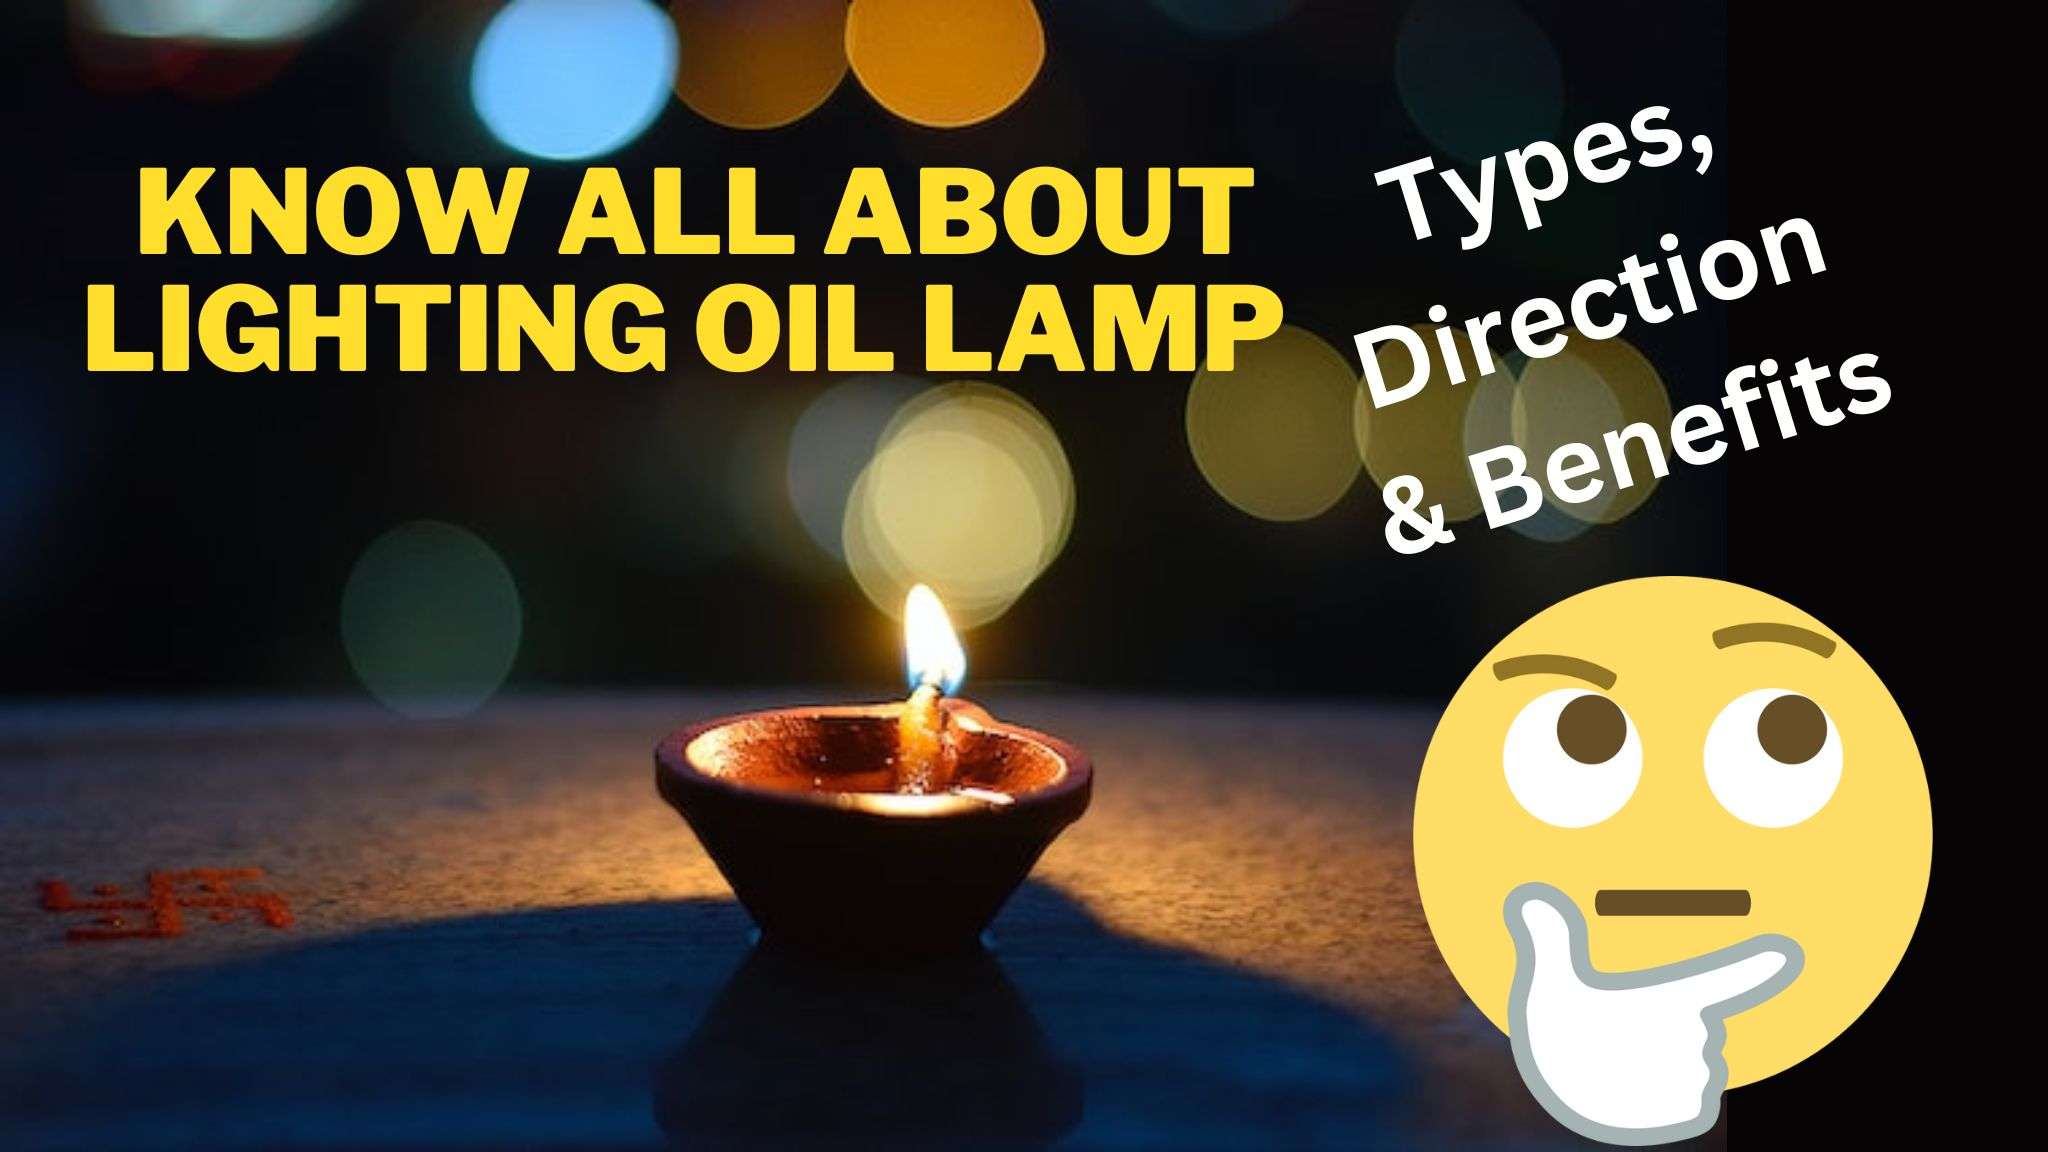 Facts and Benefits of Lighting Oil Lamp in Diwali for House Wife